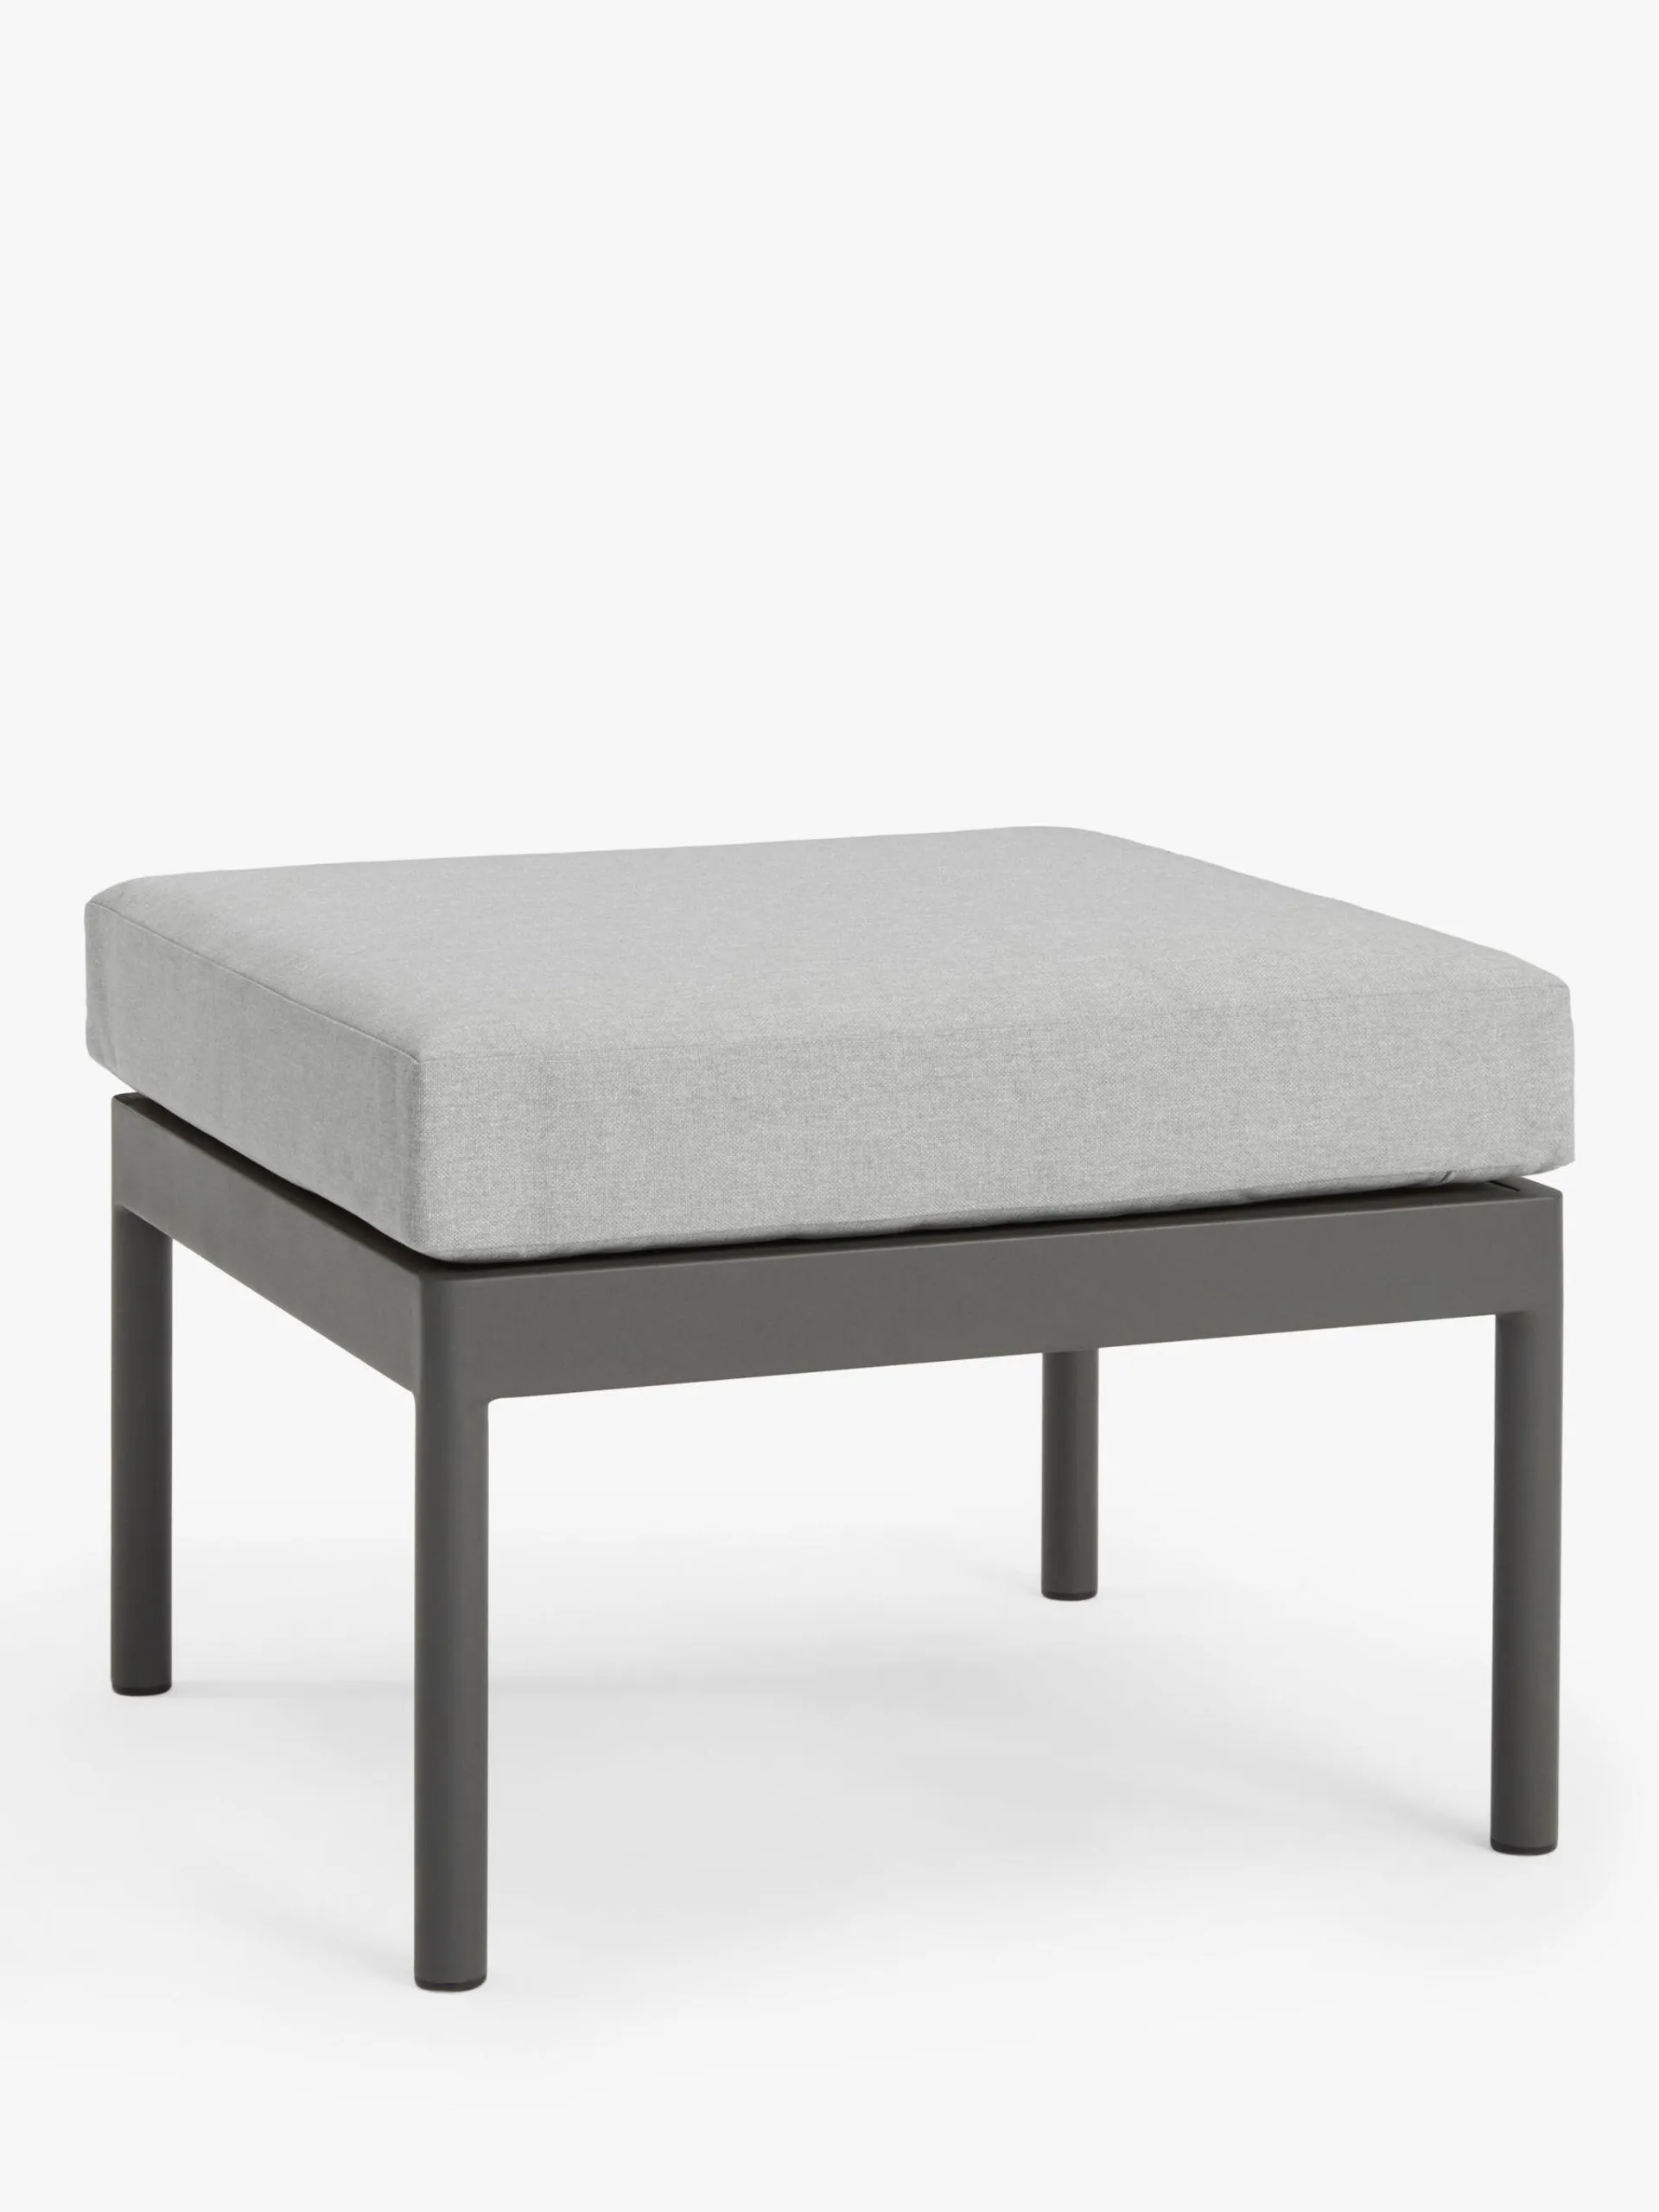 Chunky Weave Square Garden Coffee Table/Footstool, Grey